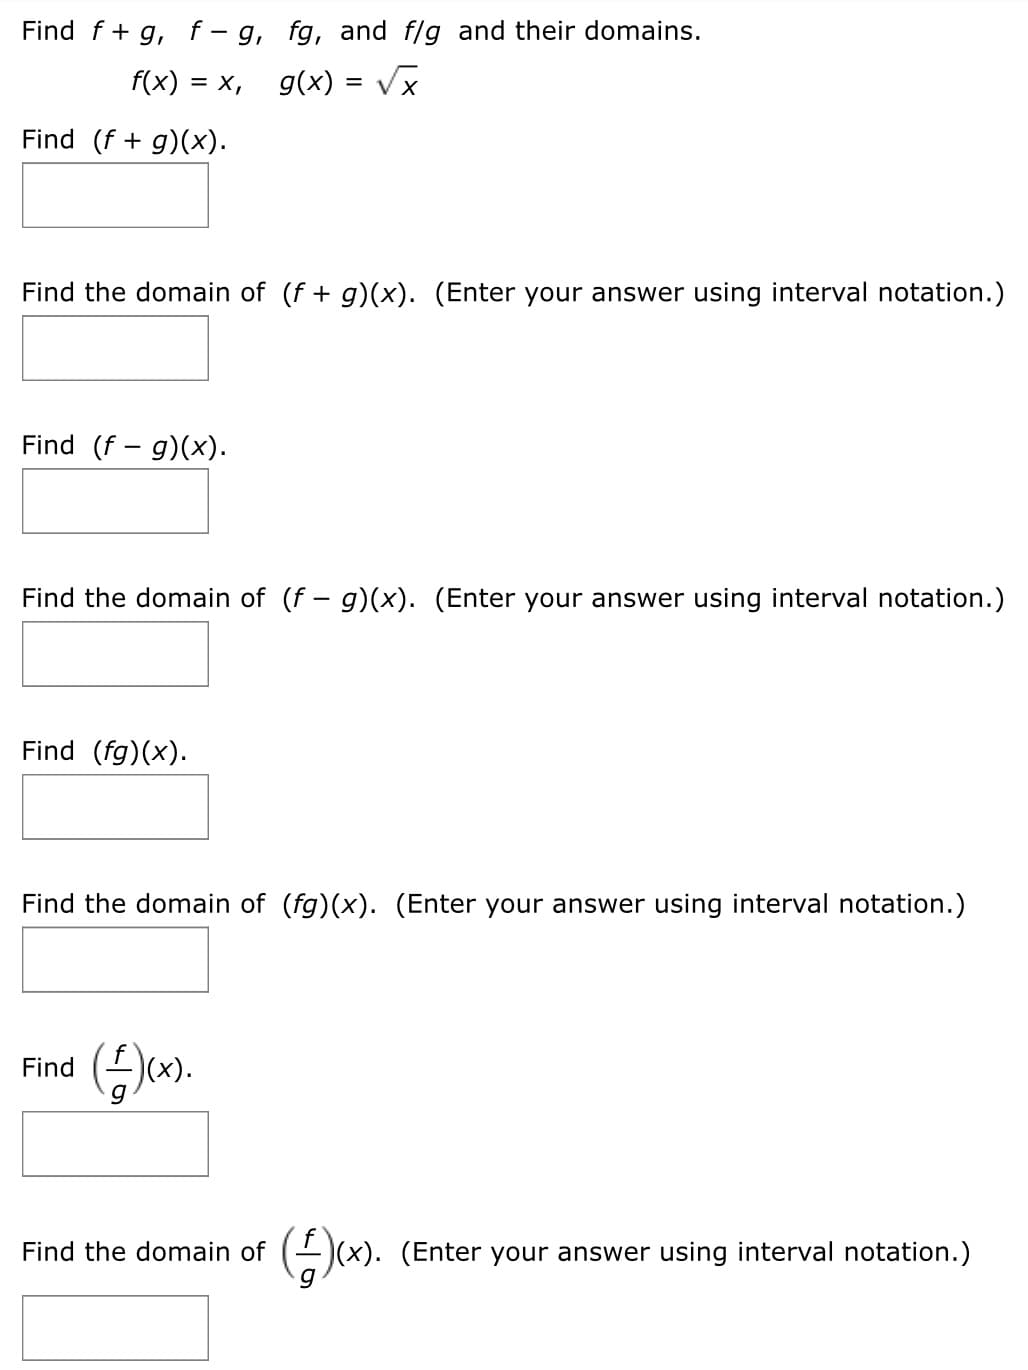 Find f+ g, f– g, fg, and f/g and their domains.
f(x) = x, g(x) = Vx
Find (f + g)(x).
Find the domain of (f + g)(x). (Enter your answer using interval notation.)
Find (f – g)(x).
